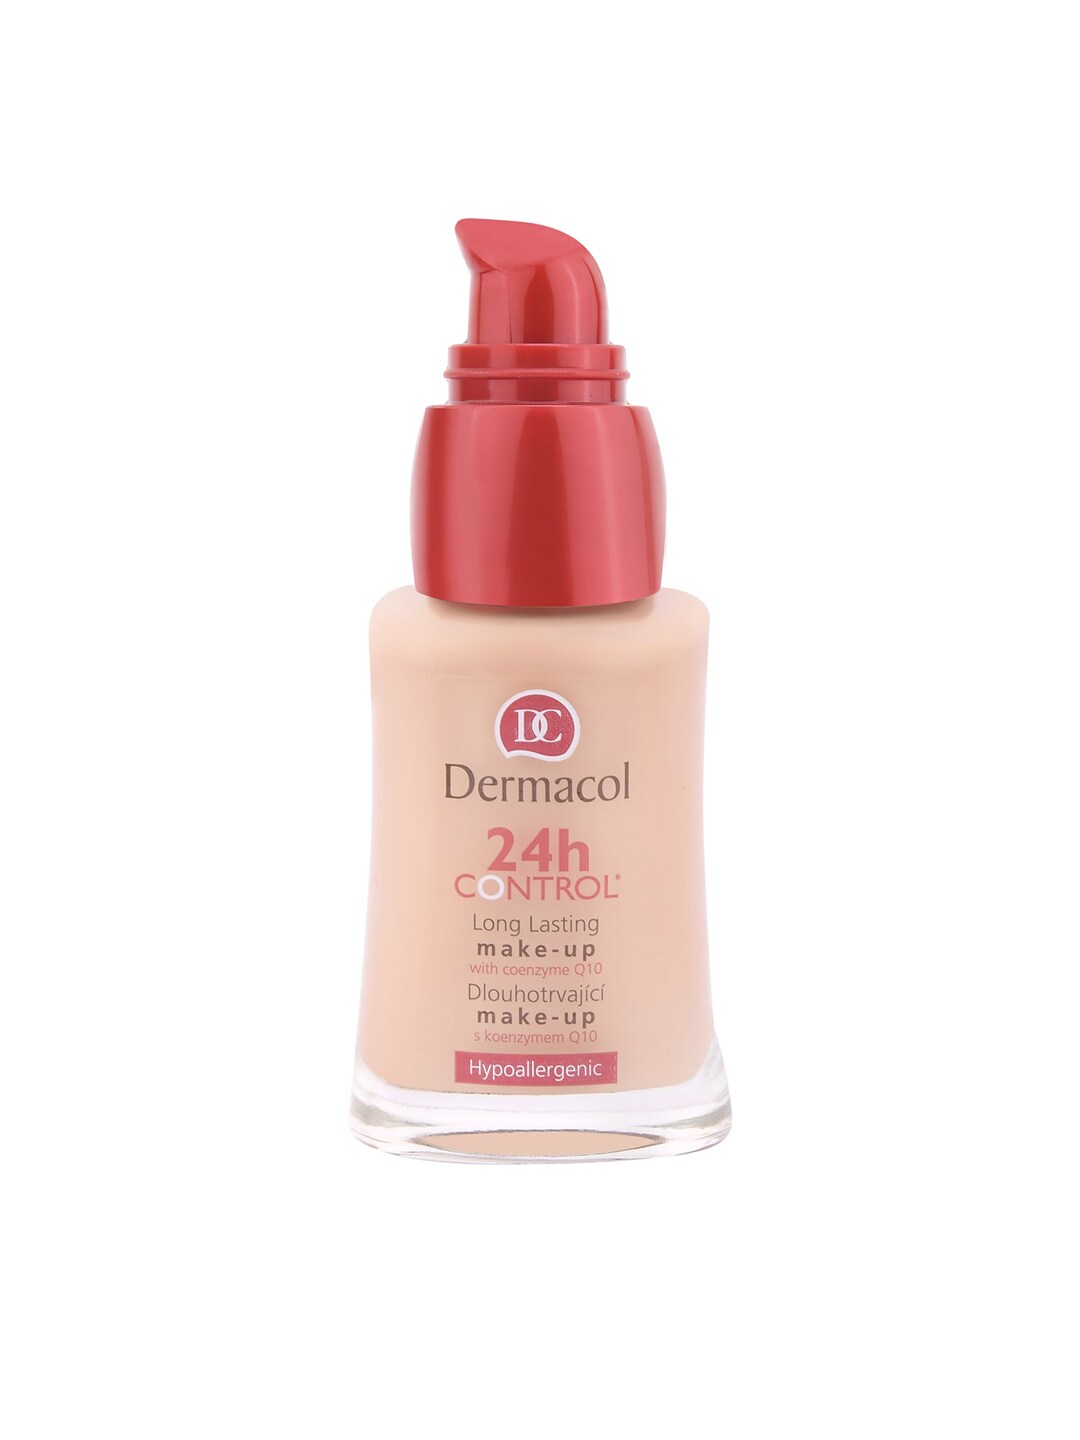 Dermacol 24H Control Make-up Foundation Cream 02 - 30 ml Price in India